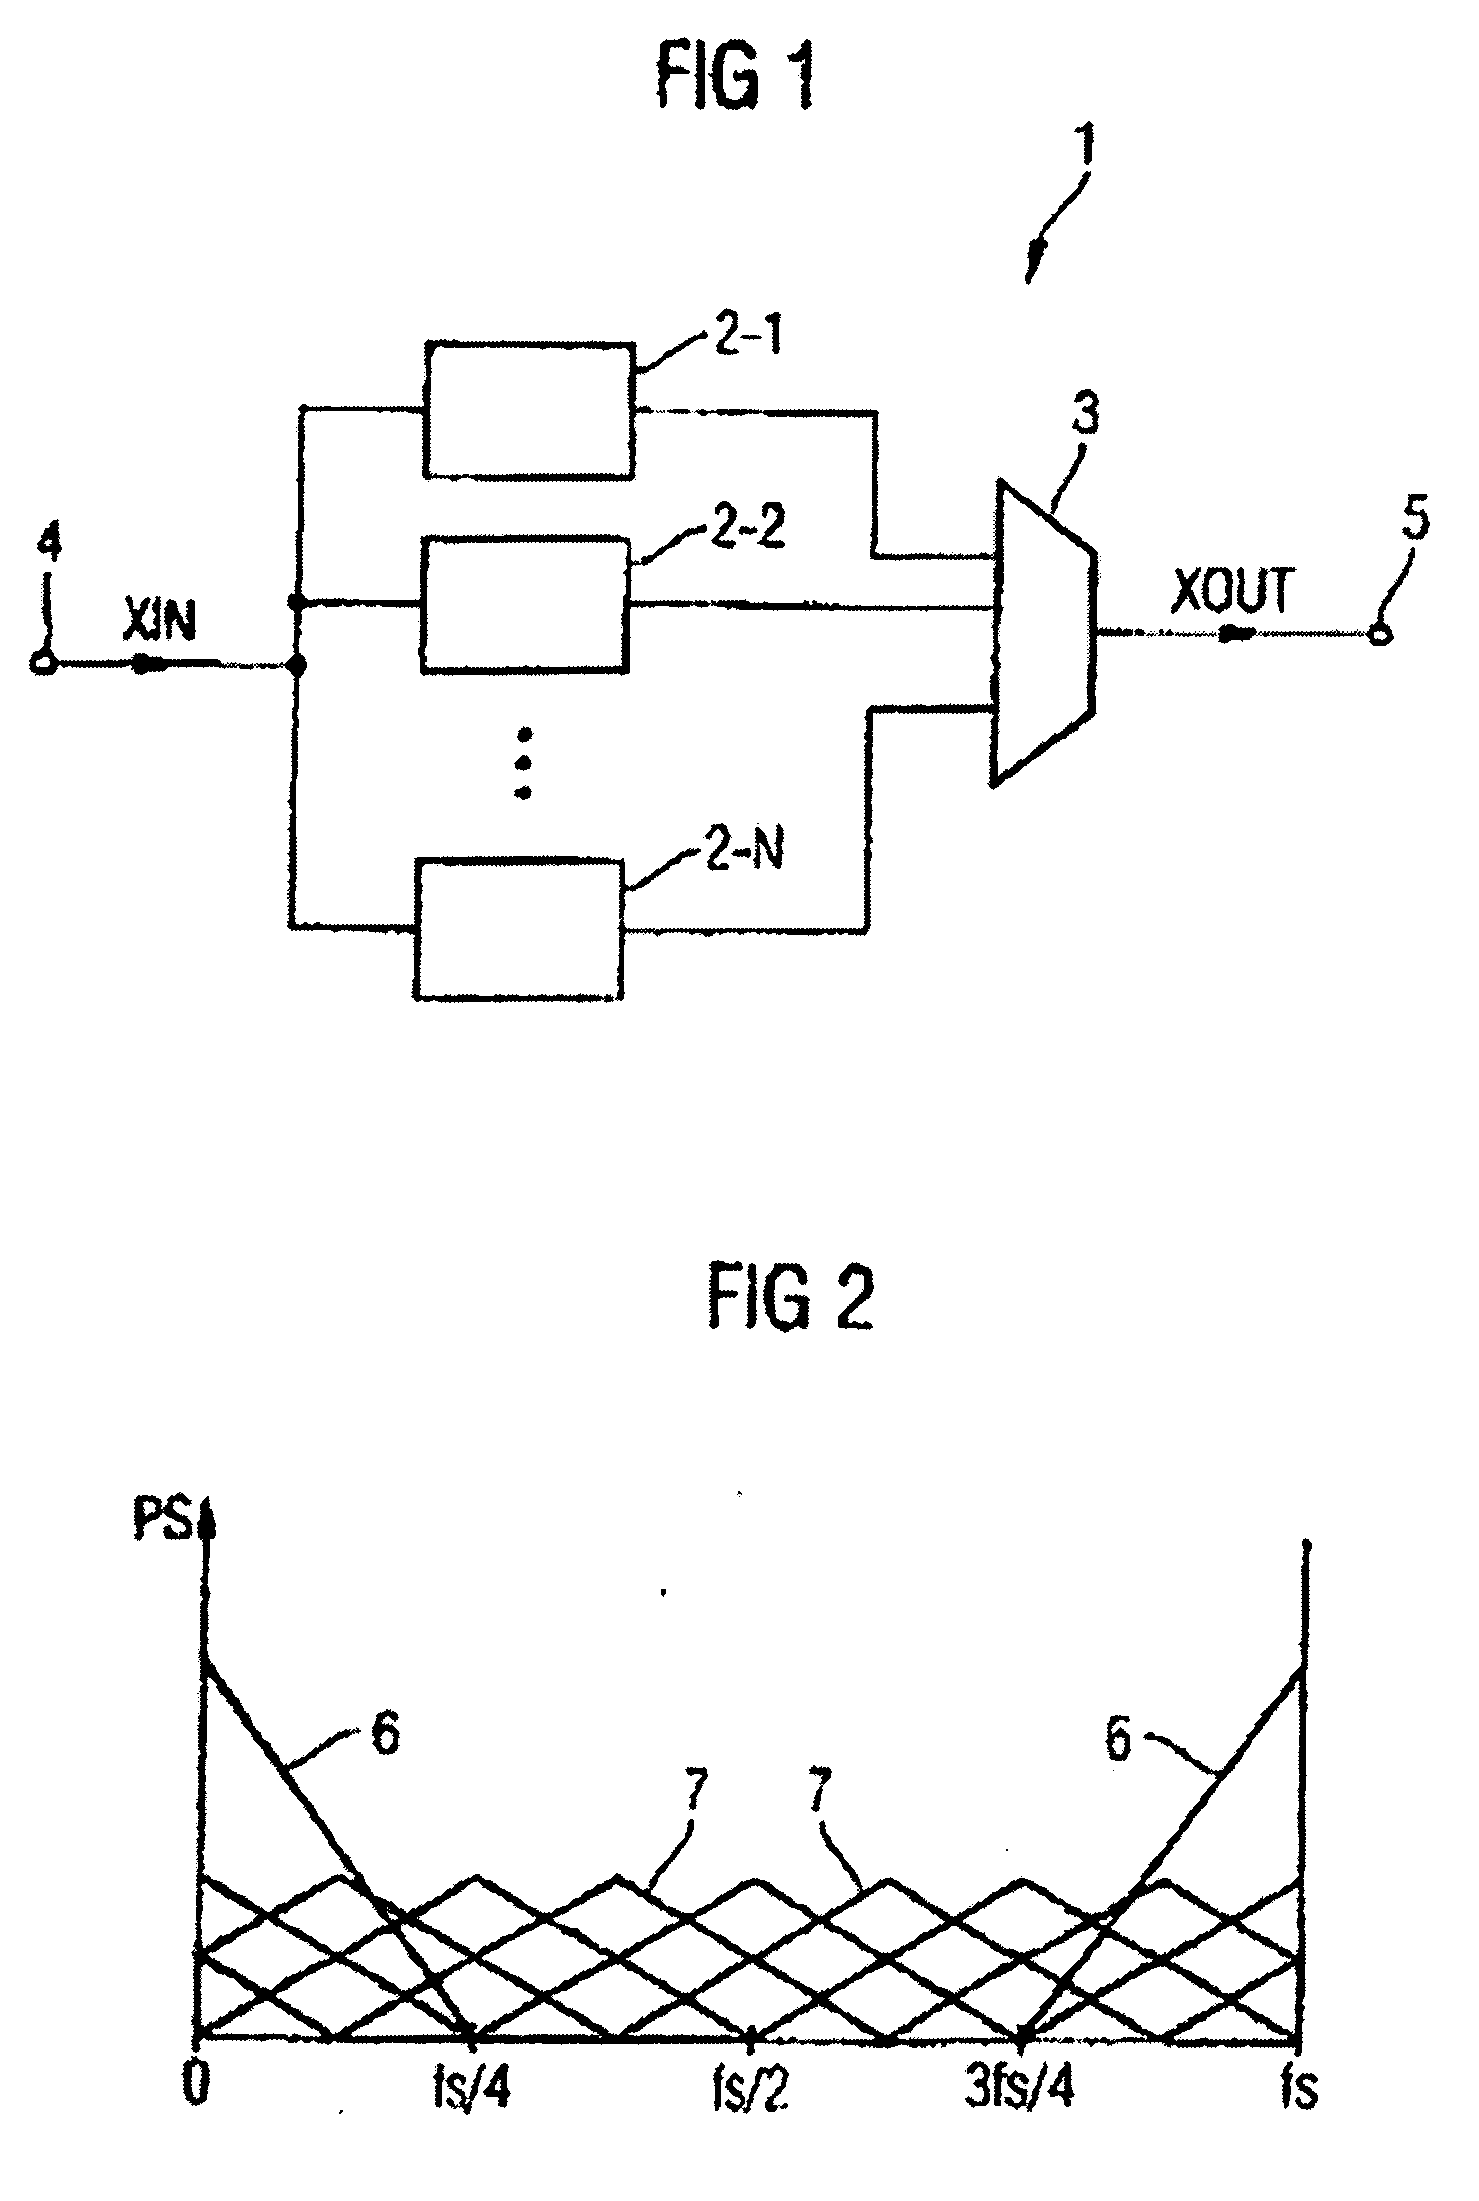 Analog-to-digital converter operable with staggered timing